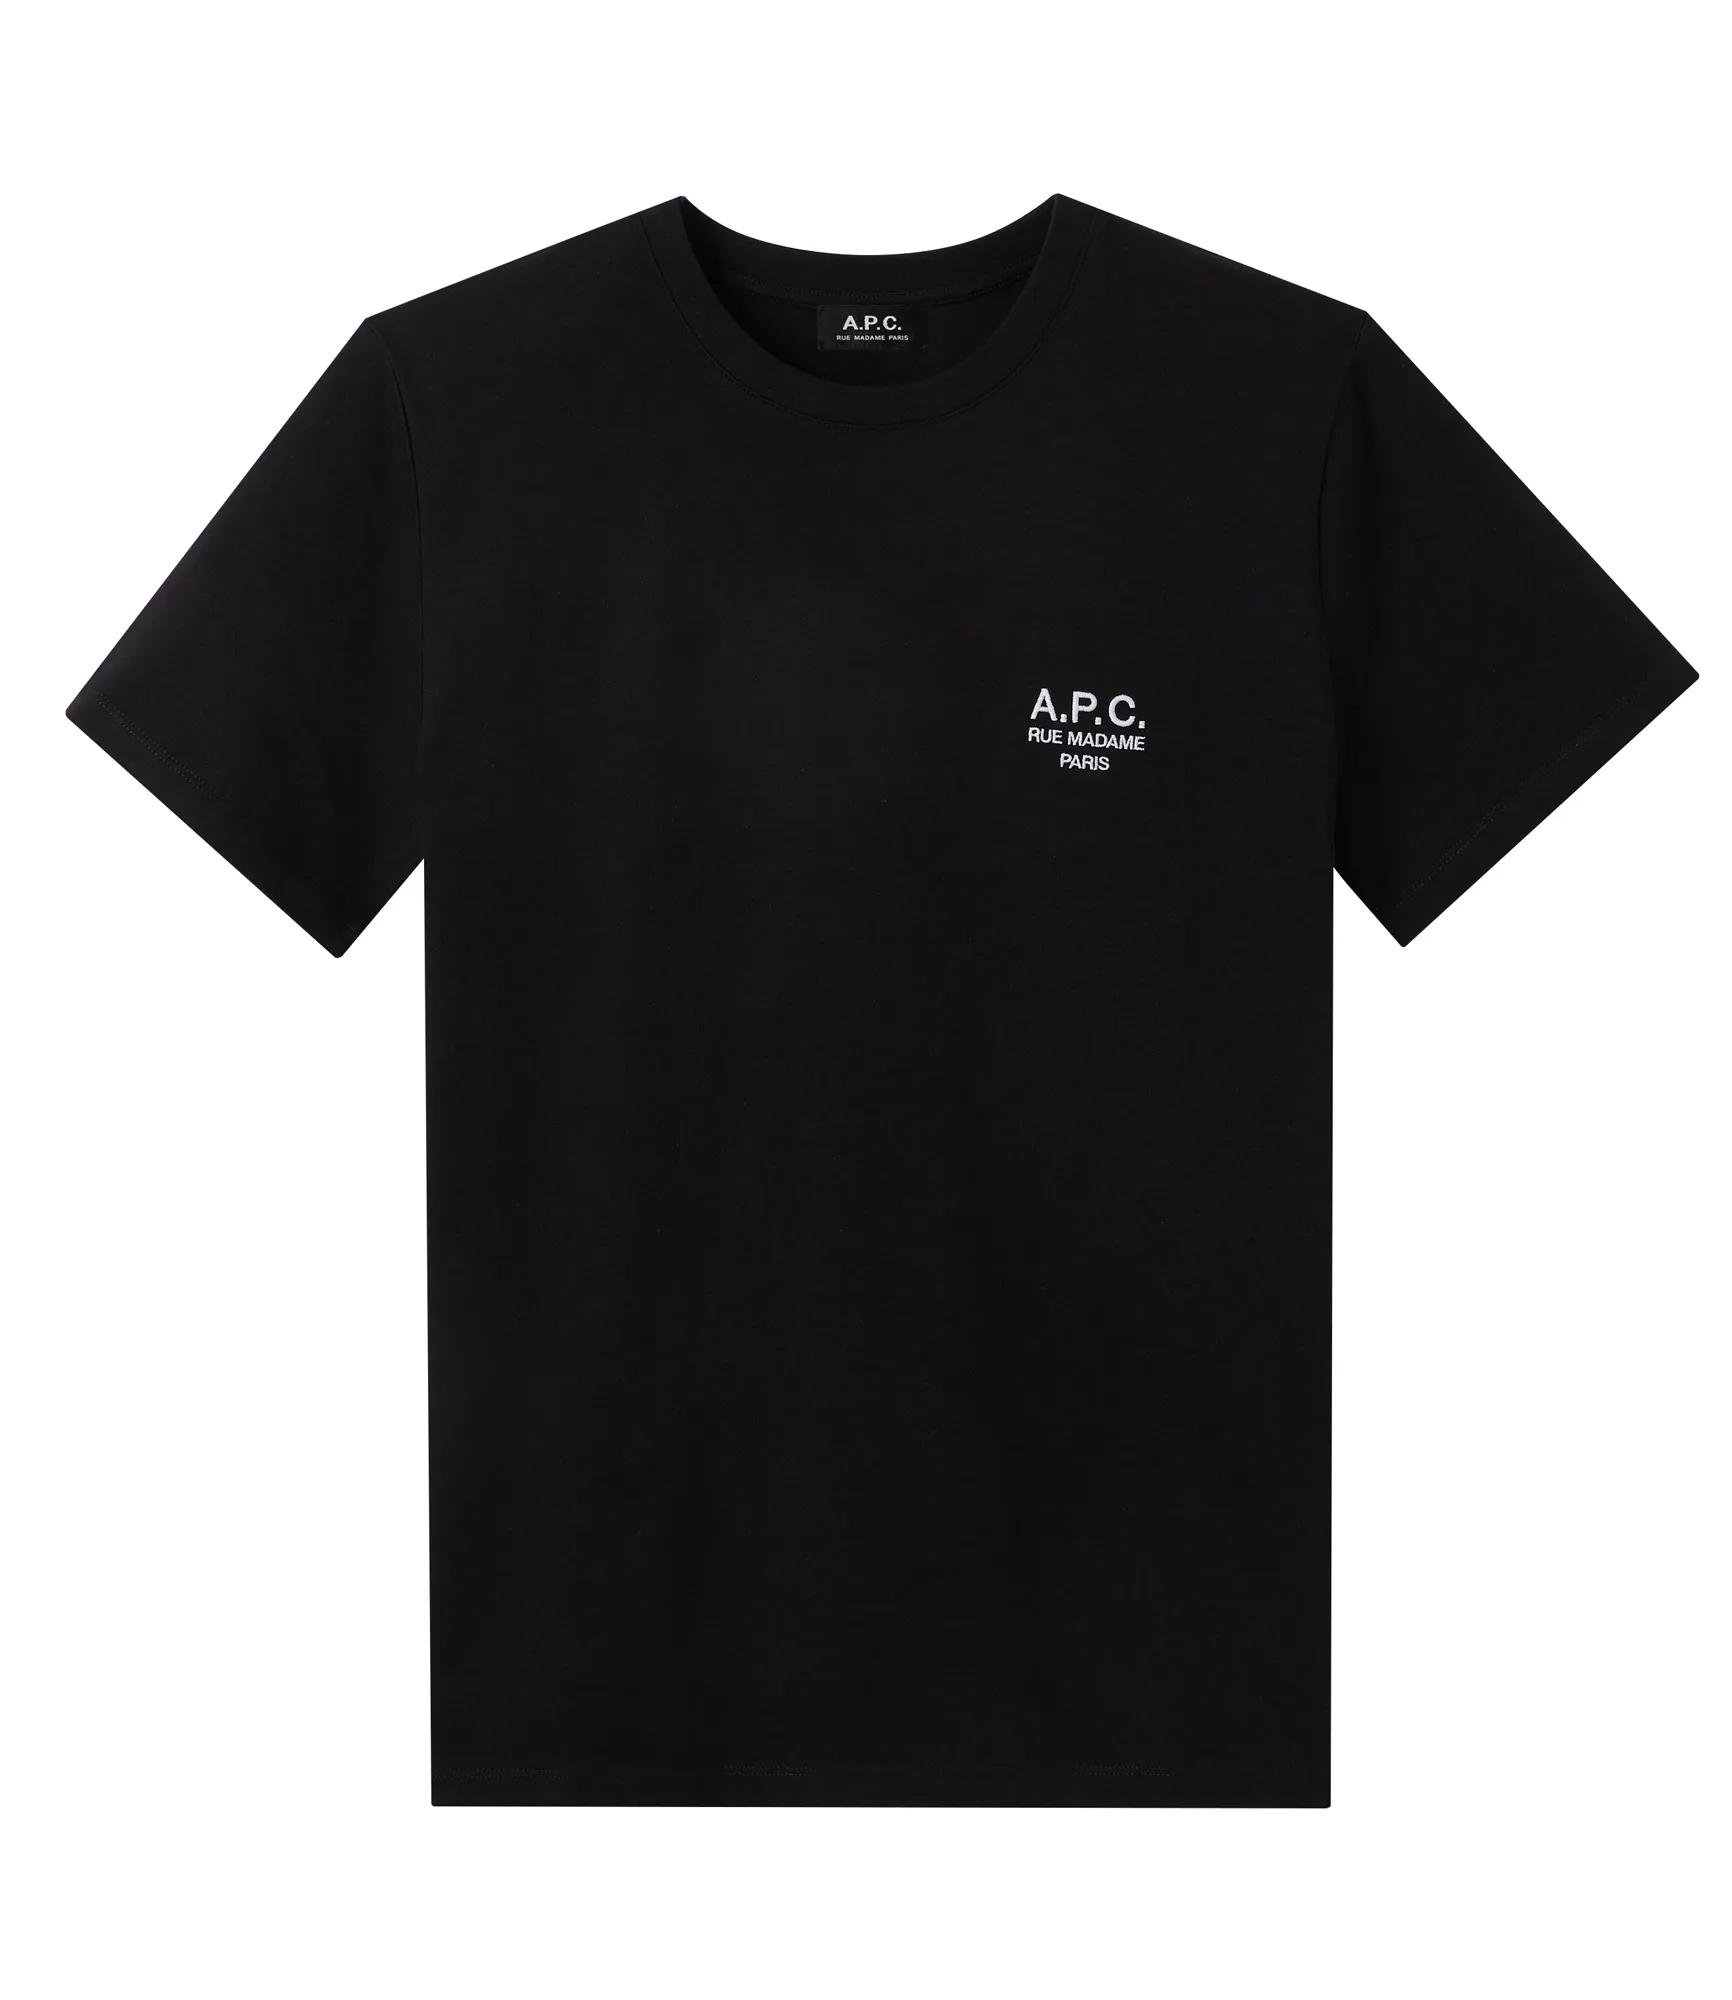 A.P.C. Raymond T-shirt Black T-shirt in thick cotton with logo embroidered over the heart.